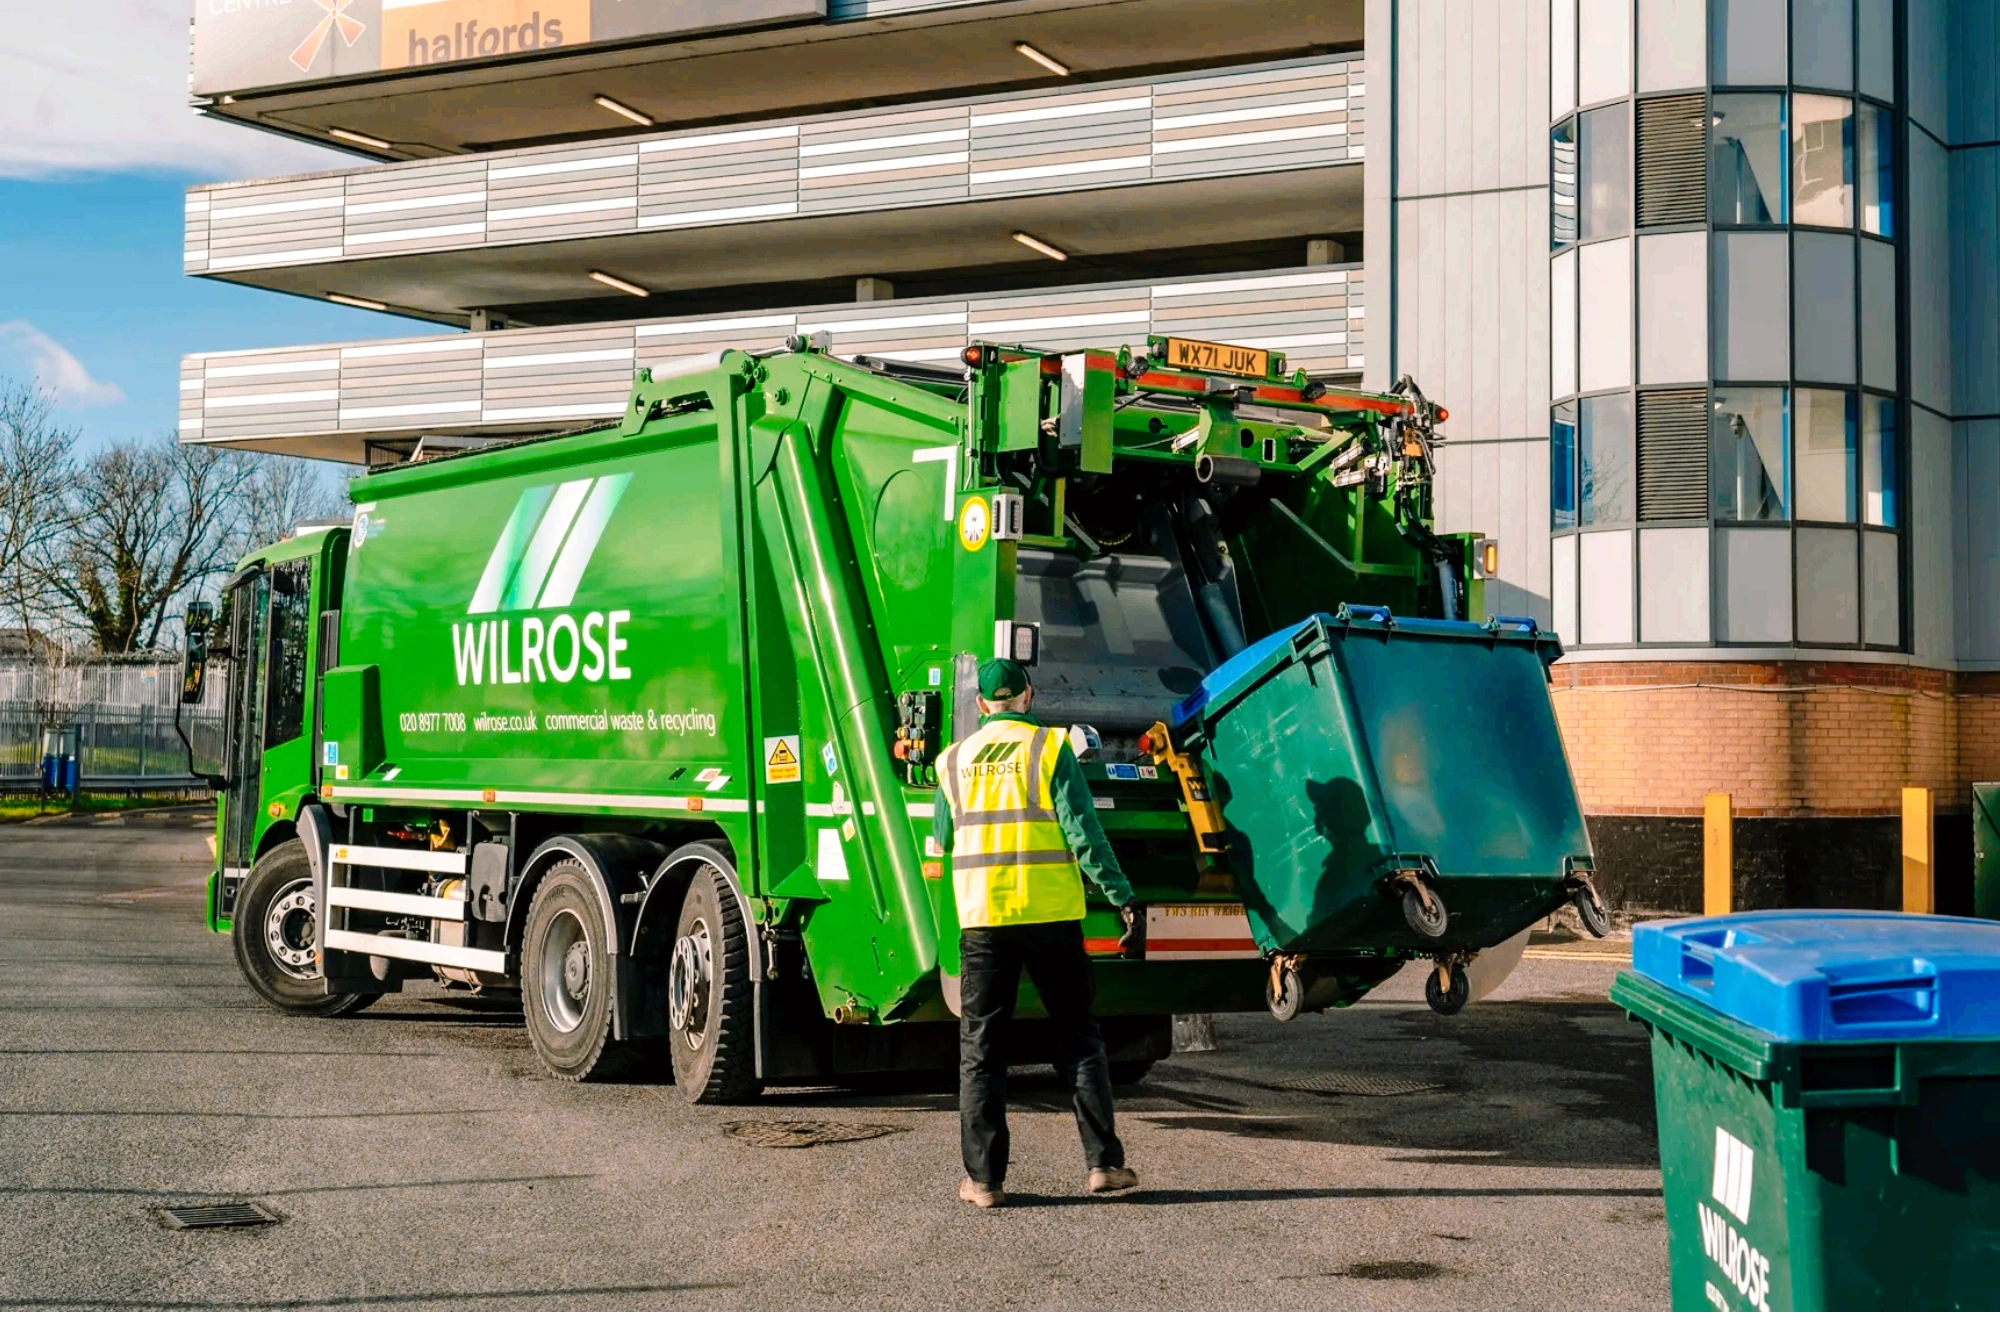 Chertsey Commercial waste collection